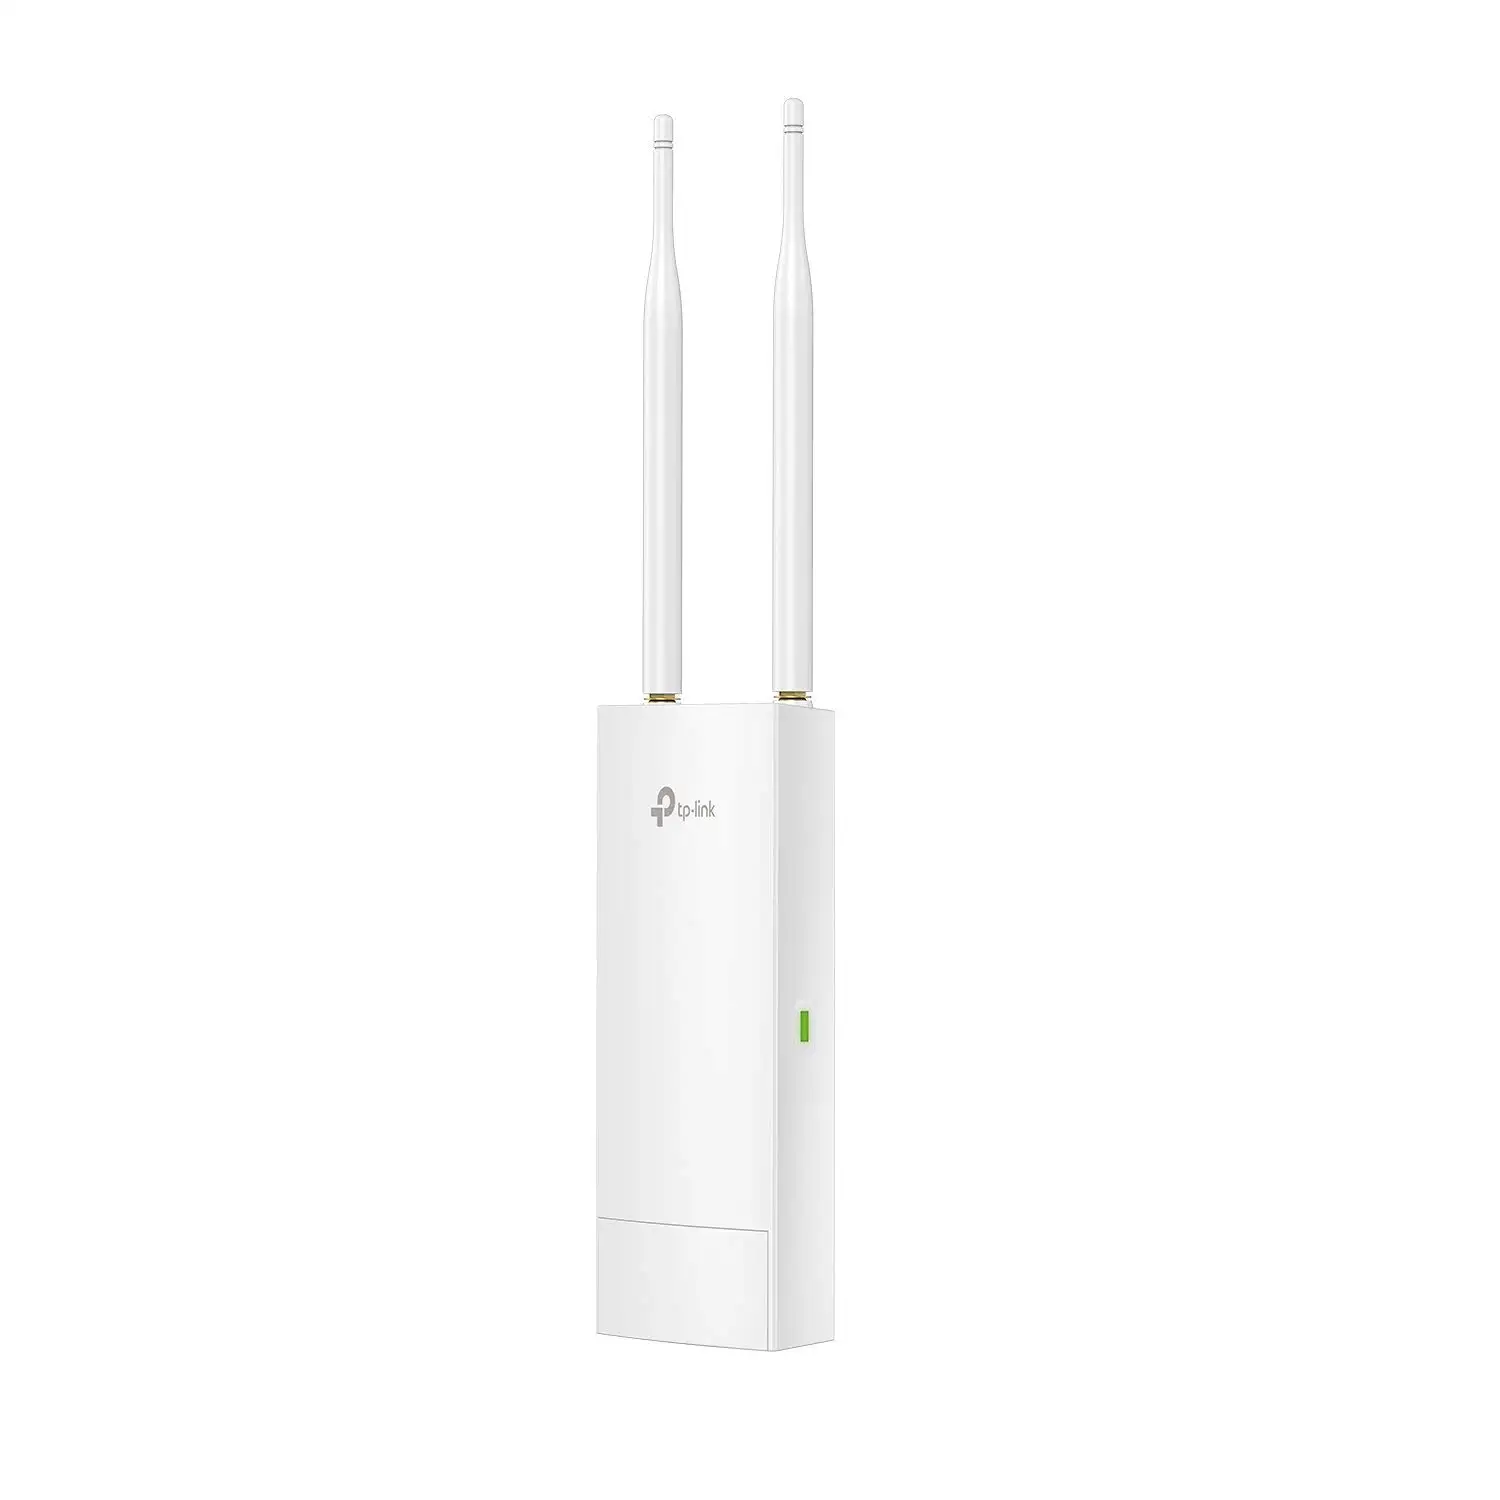 Ap/Client/Bridge/Repeater 802.11B/G/N 2X 4Dbi Type: Networking Wireless Singleband/Routers & Gateways 2.4Ghz 300Mbps Tp-Link Tl-Wa801nd Wireless N300 Access Point Passive Poe Prod 